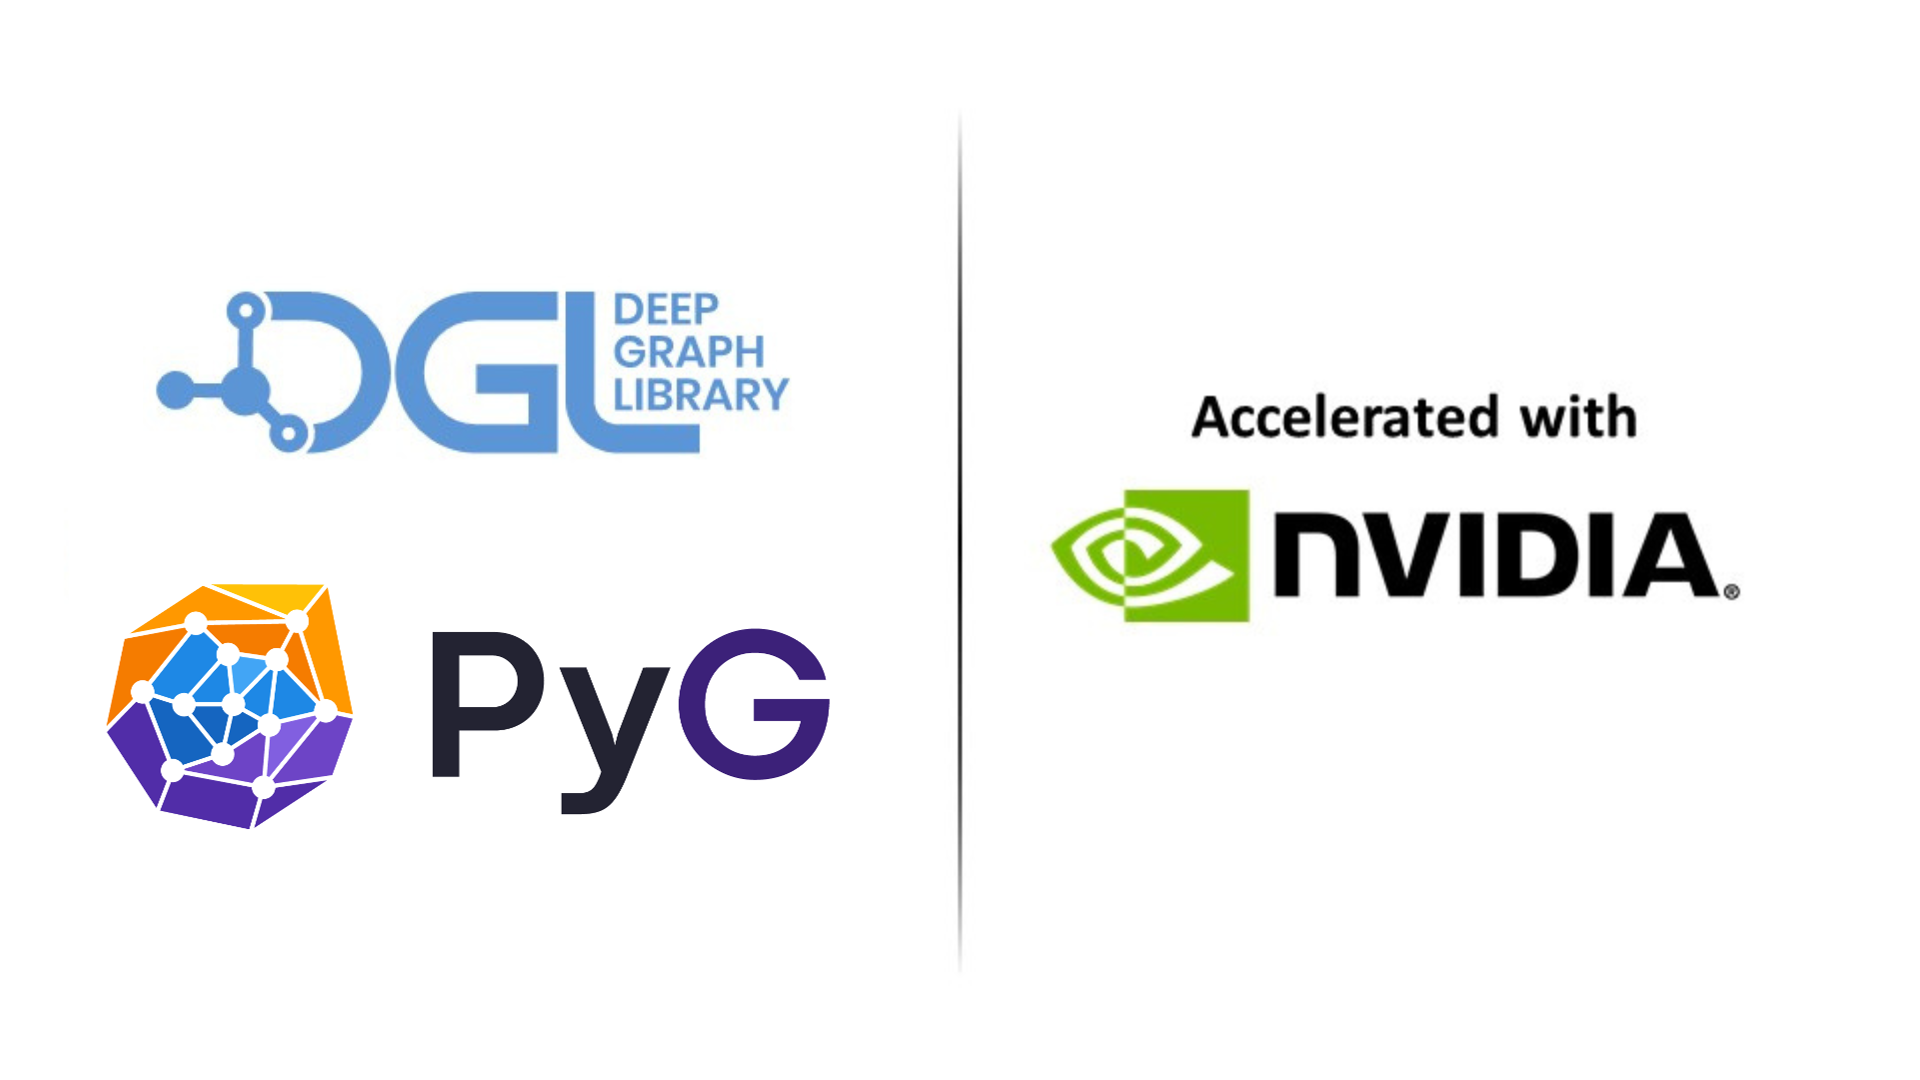 Image is the DGL and PyG logos with the words Accelerated by NVIDIA.